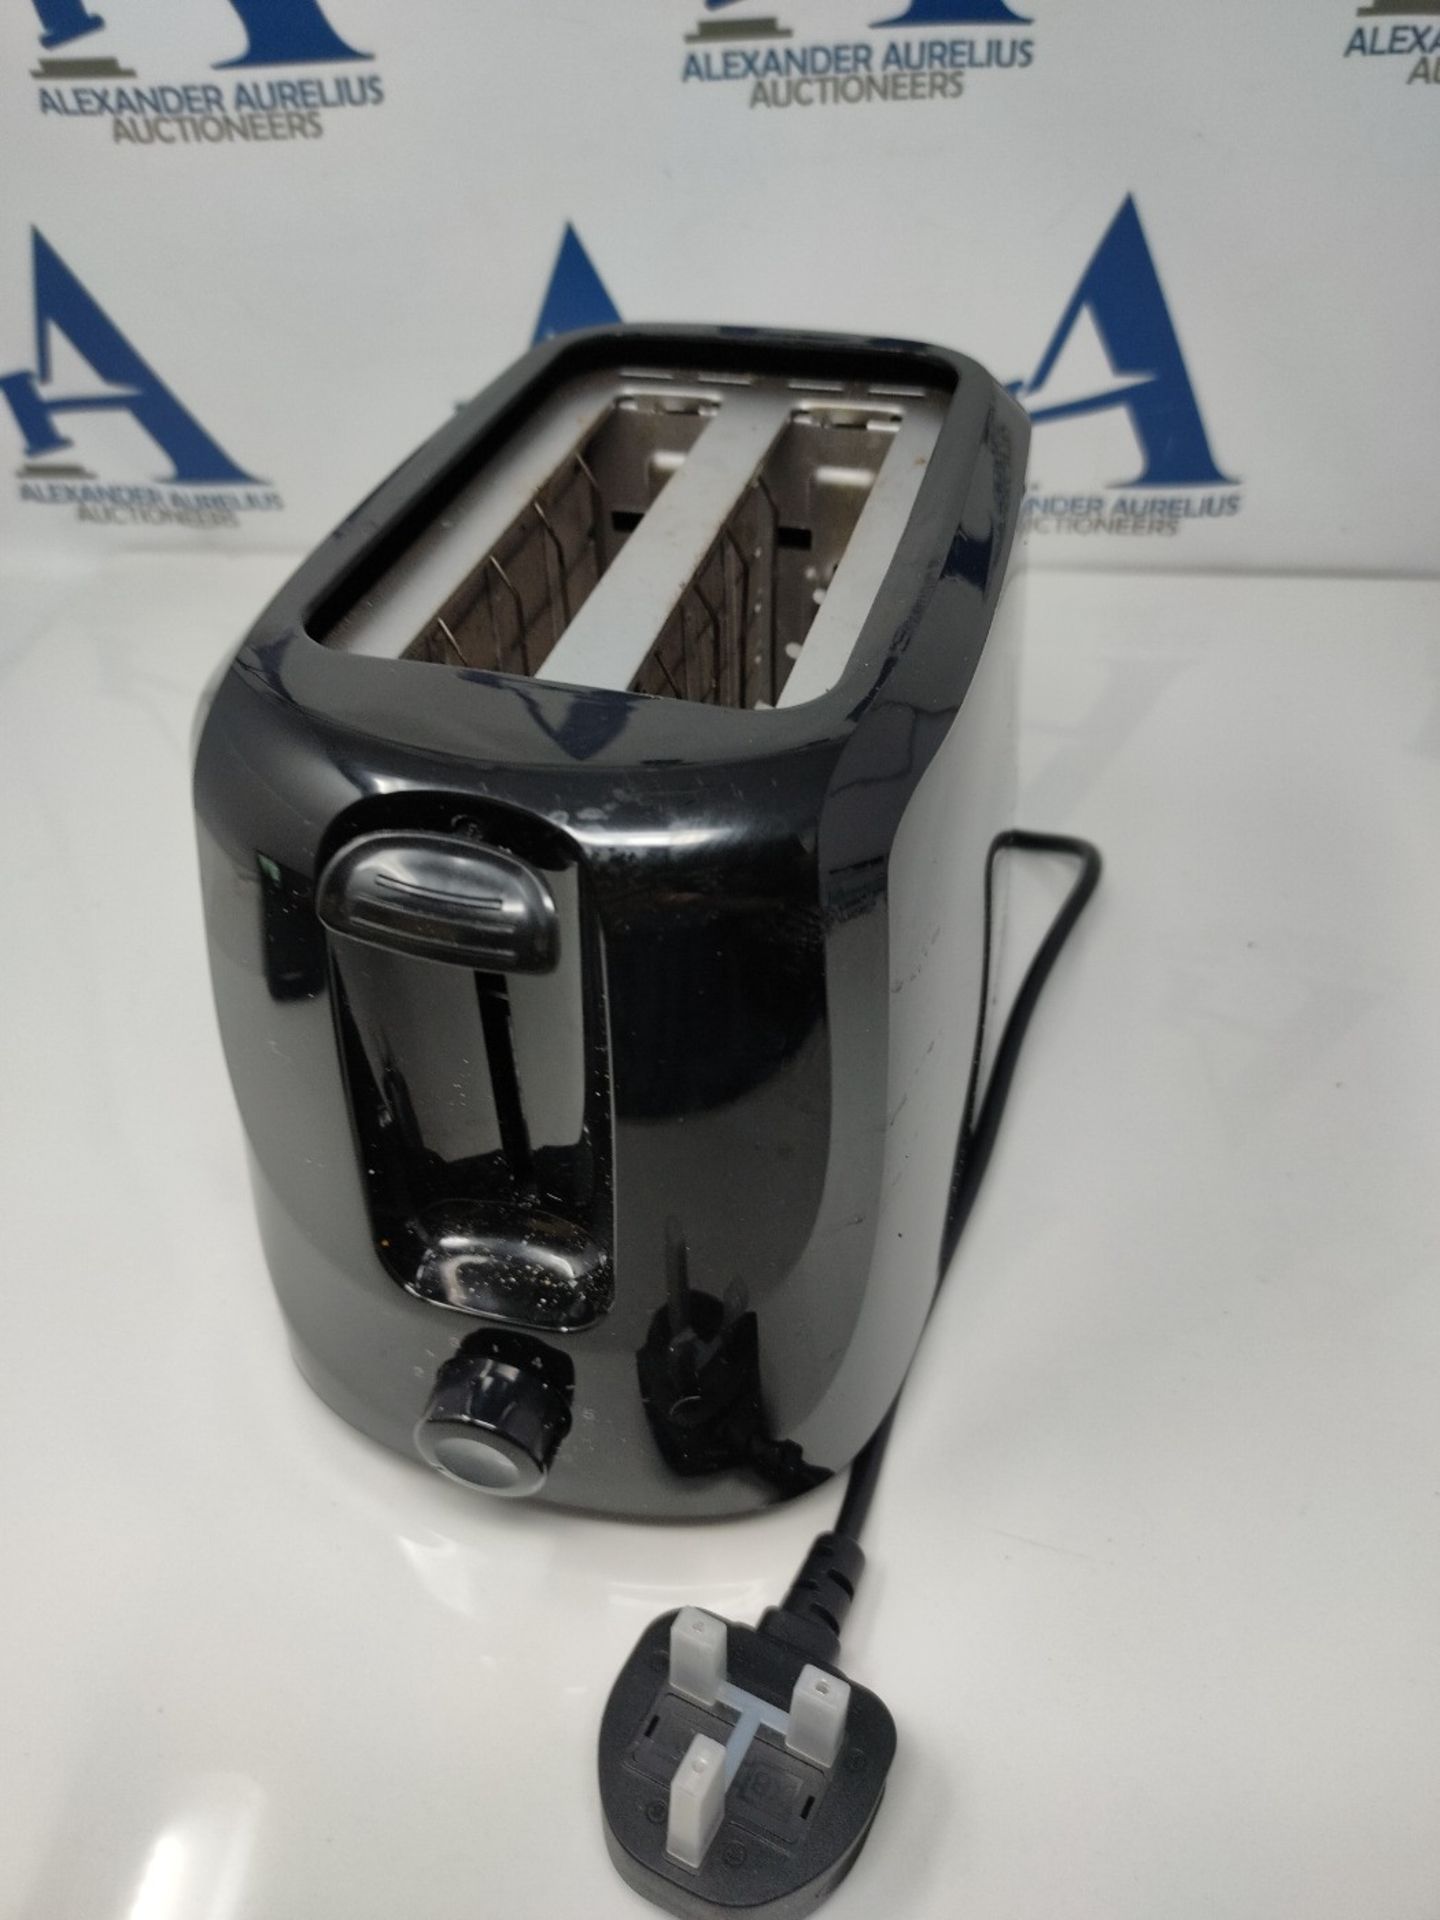 PIFCOÂ® Essentials Black Toaster 2 Slice - 6 Browning Controls & Anti-Jam Function - - Image 3 of 3